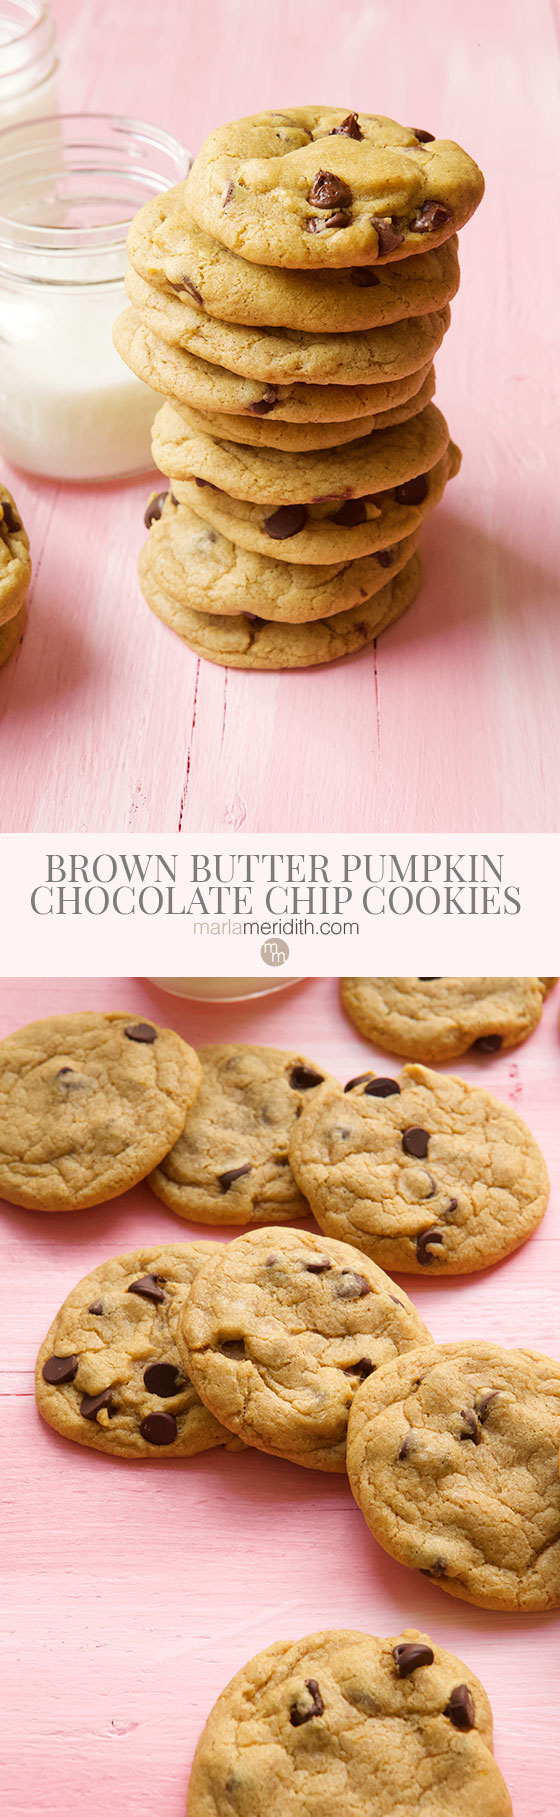 You have got to bake up a batch of these Brown Butter Pumpkin Chocolate Chip Cookies asap! A very delicious recipe for the holiday season! MarlaMeridith.com